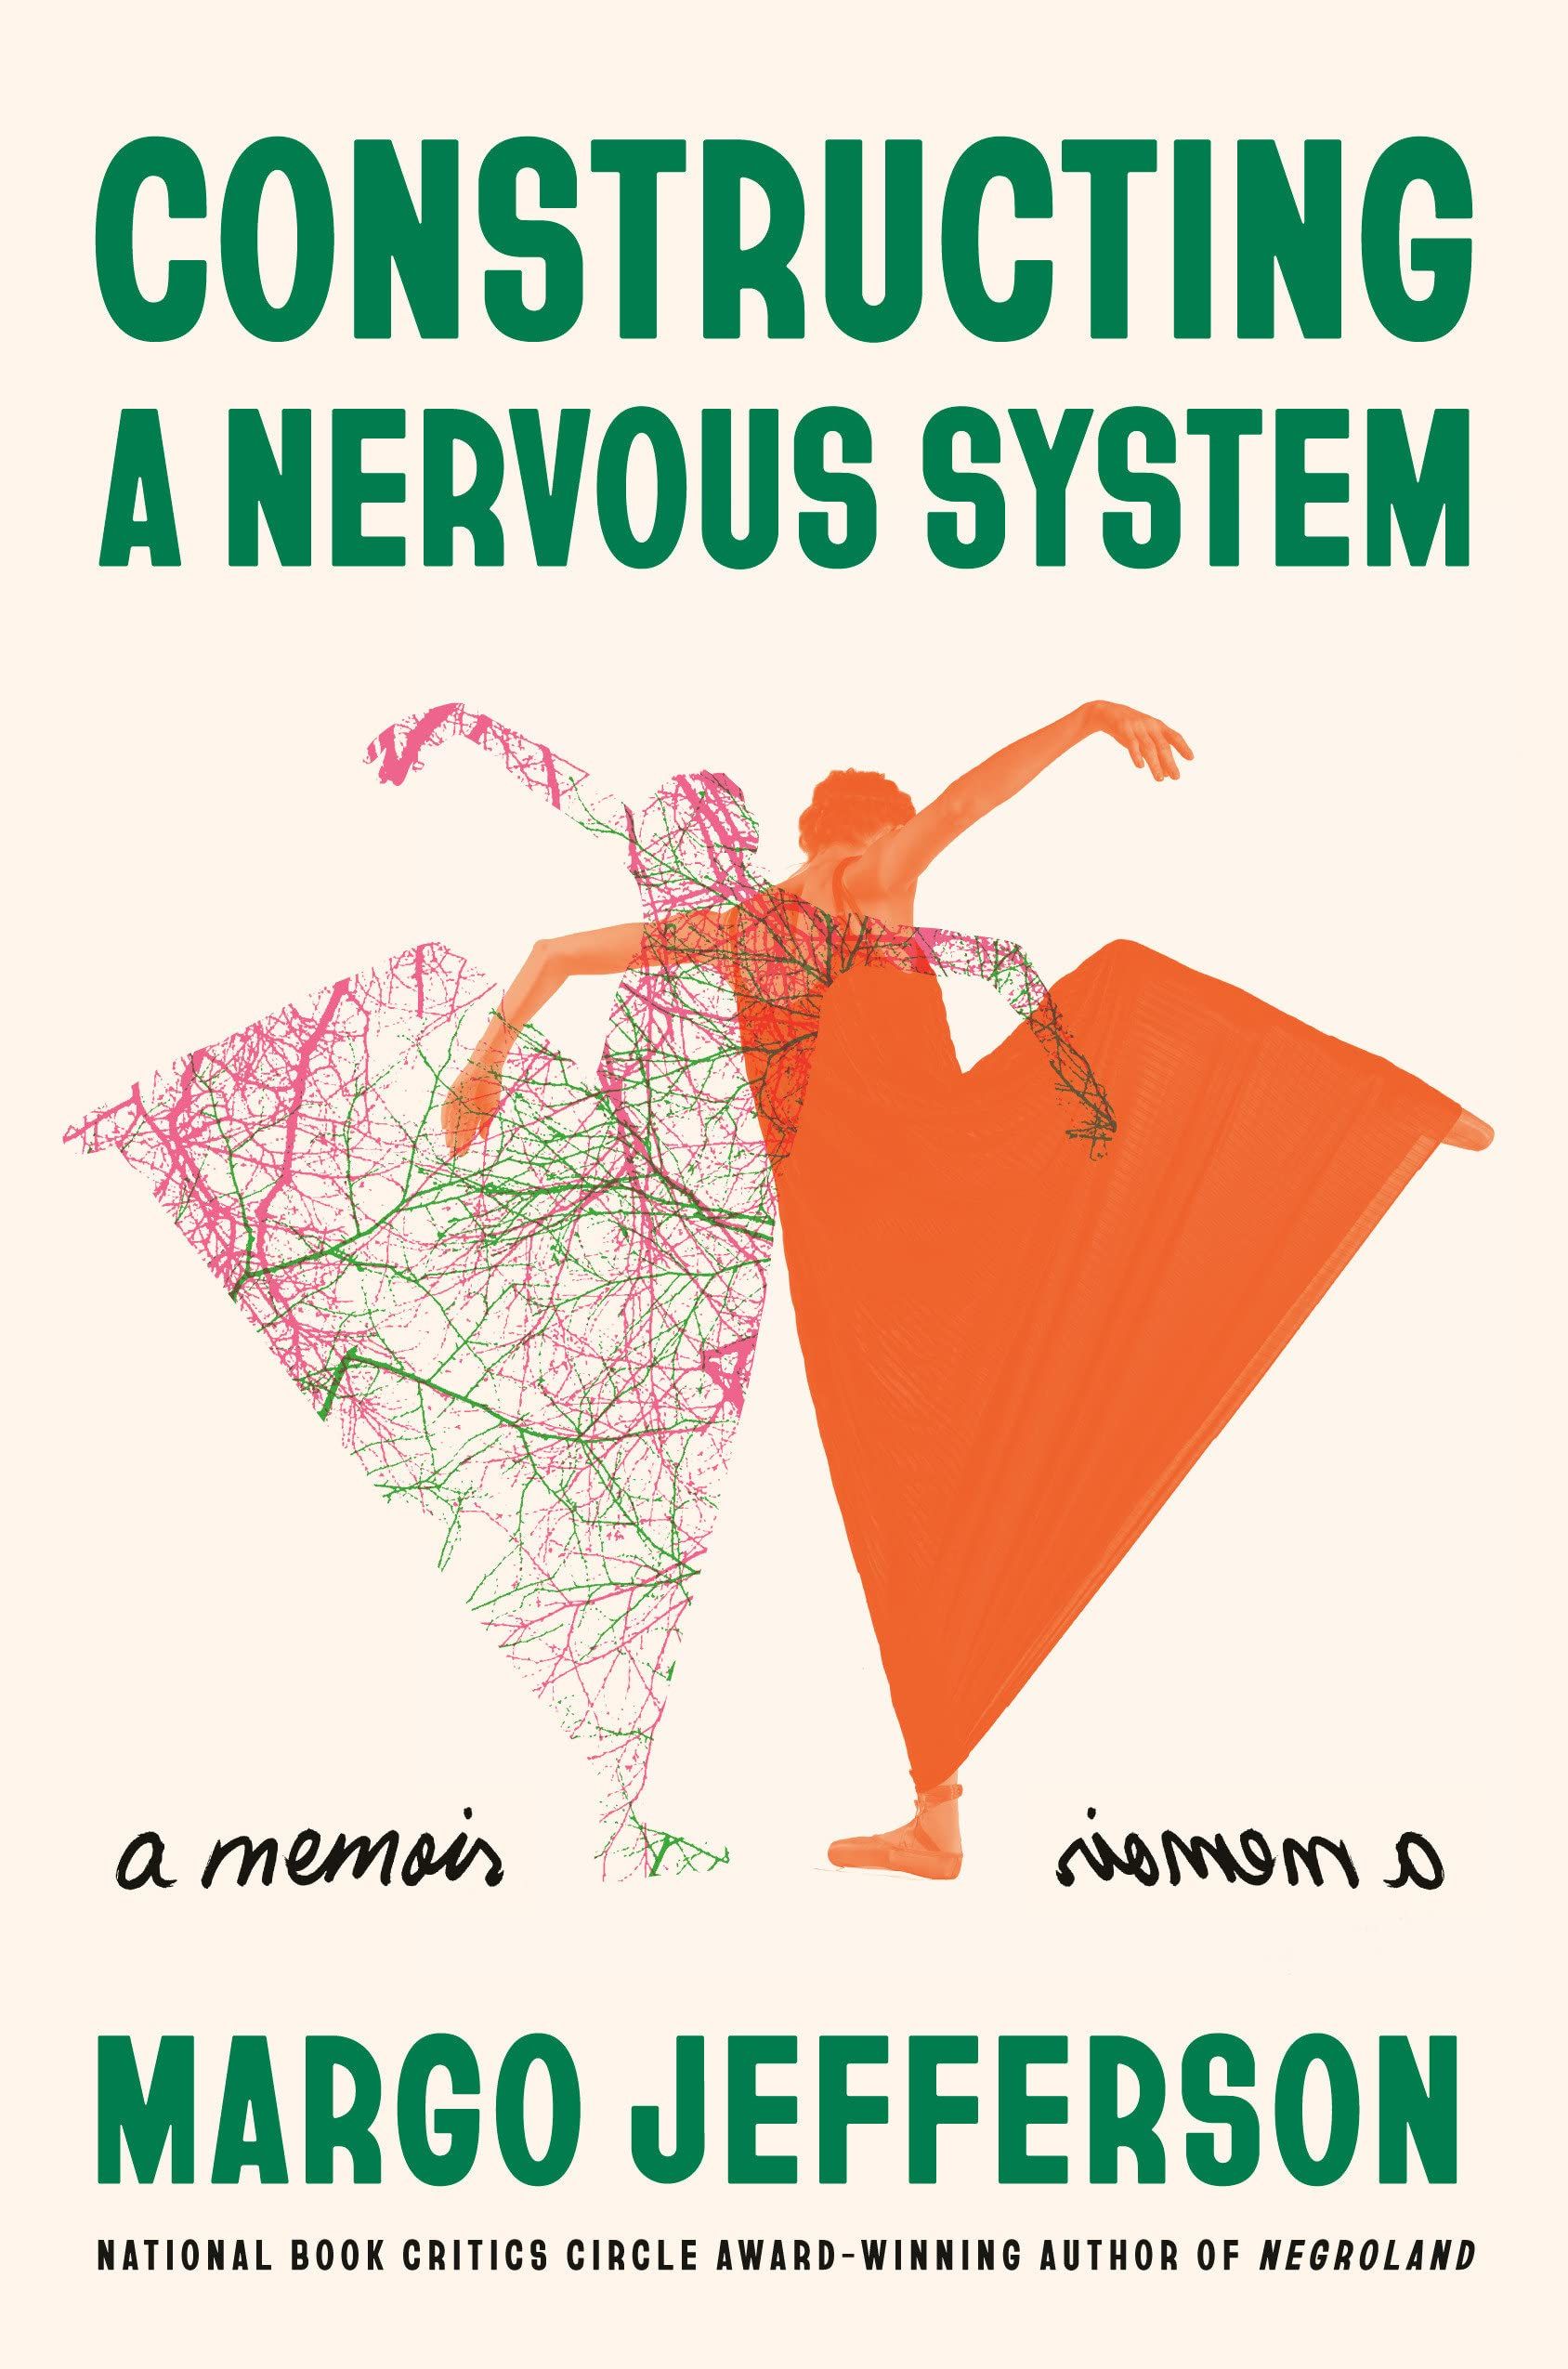 Constructing a Nervous System by Margo Jefferson book cover